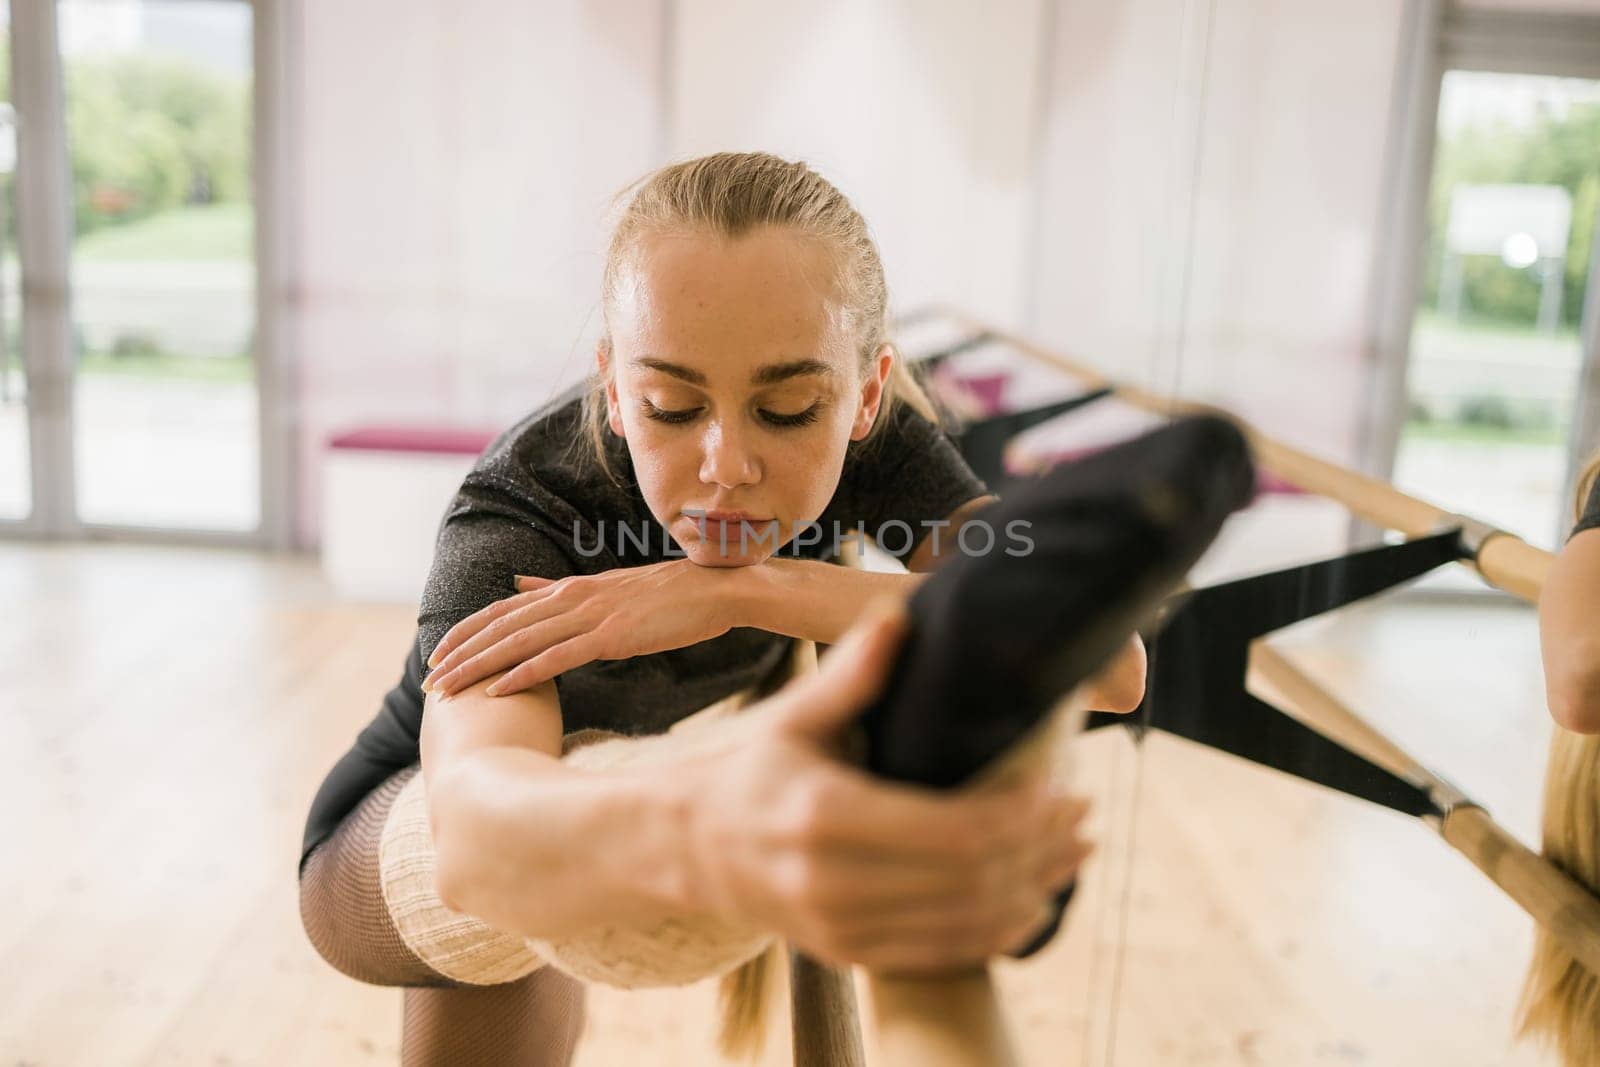 Young woman ballerina stretching and training at barre in dance studio - ballet and dancer